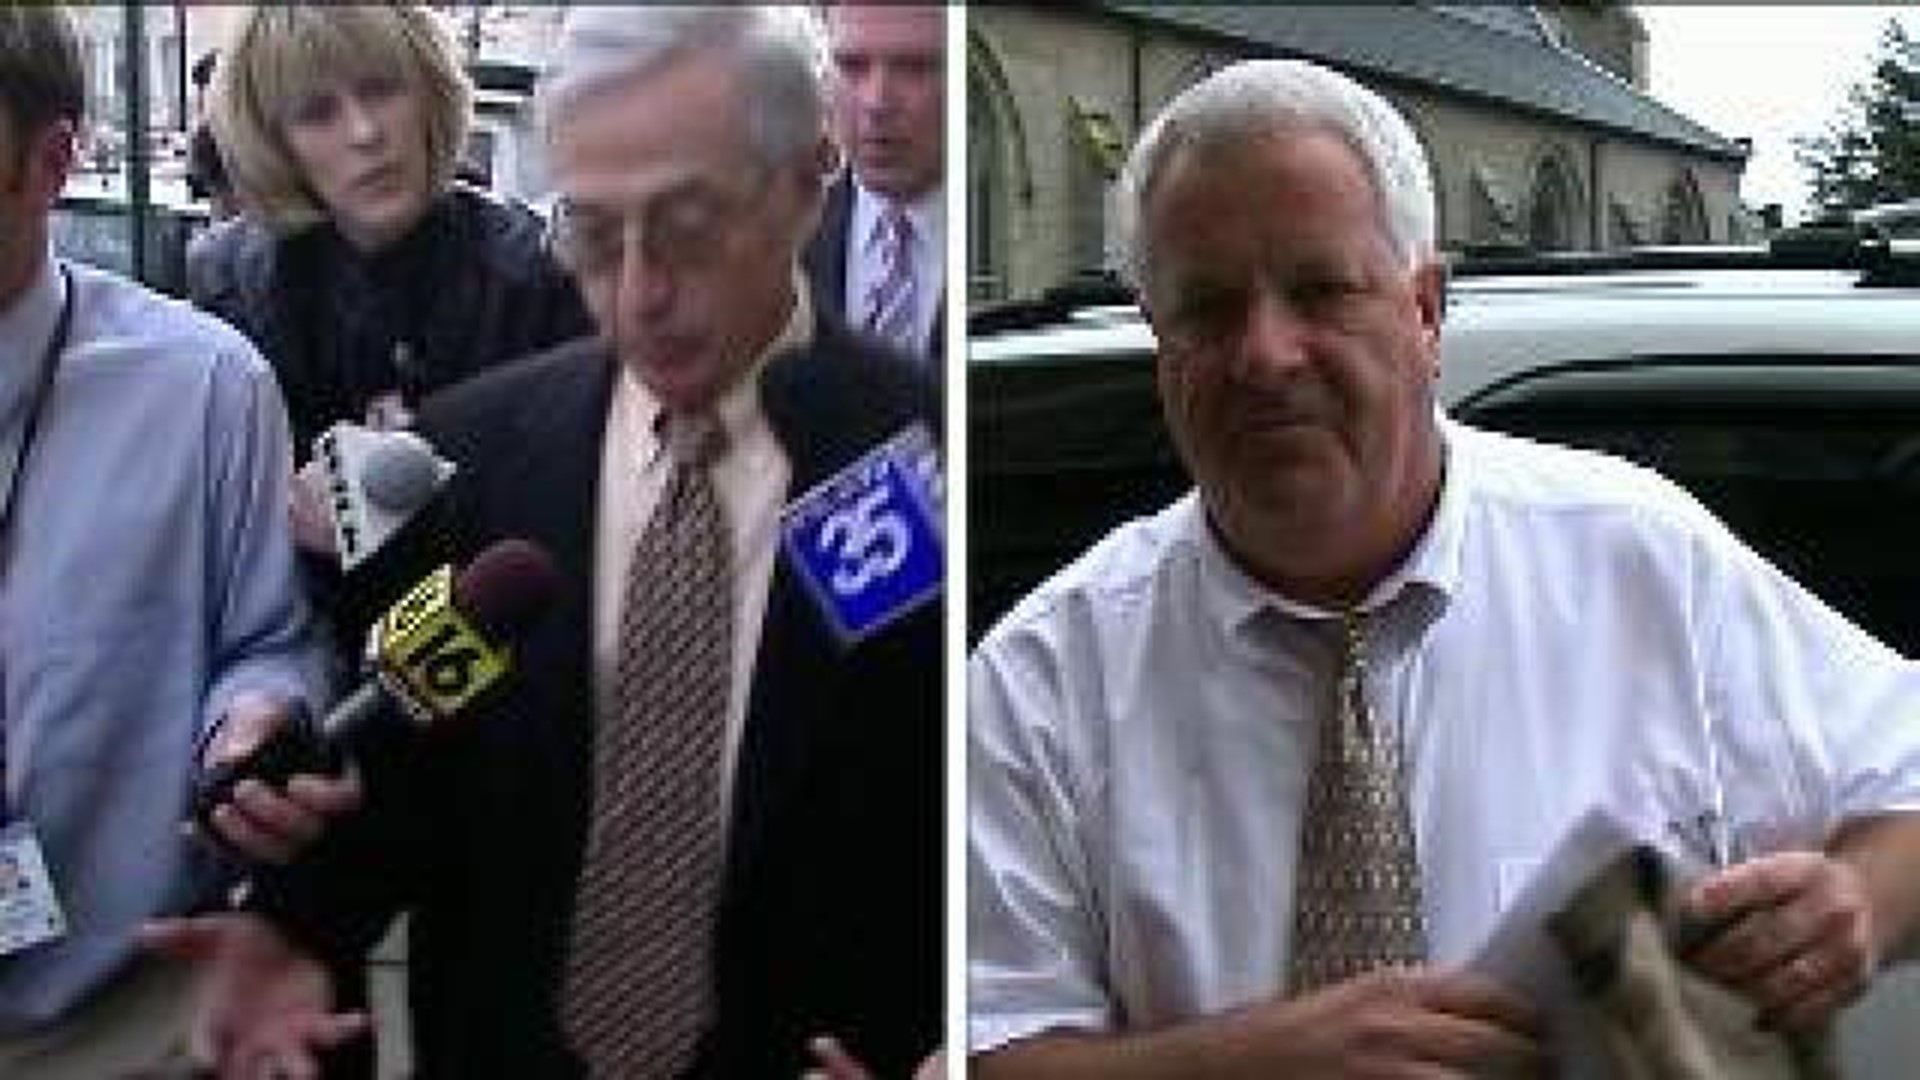 Kids for Cash: Five Years Since Ciavarella and Conahan were Charged